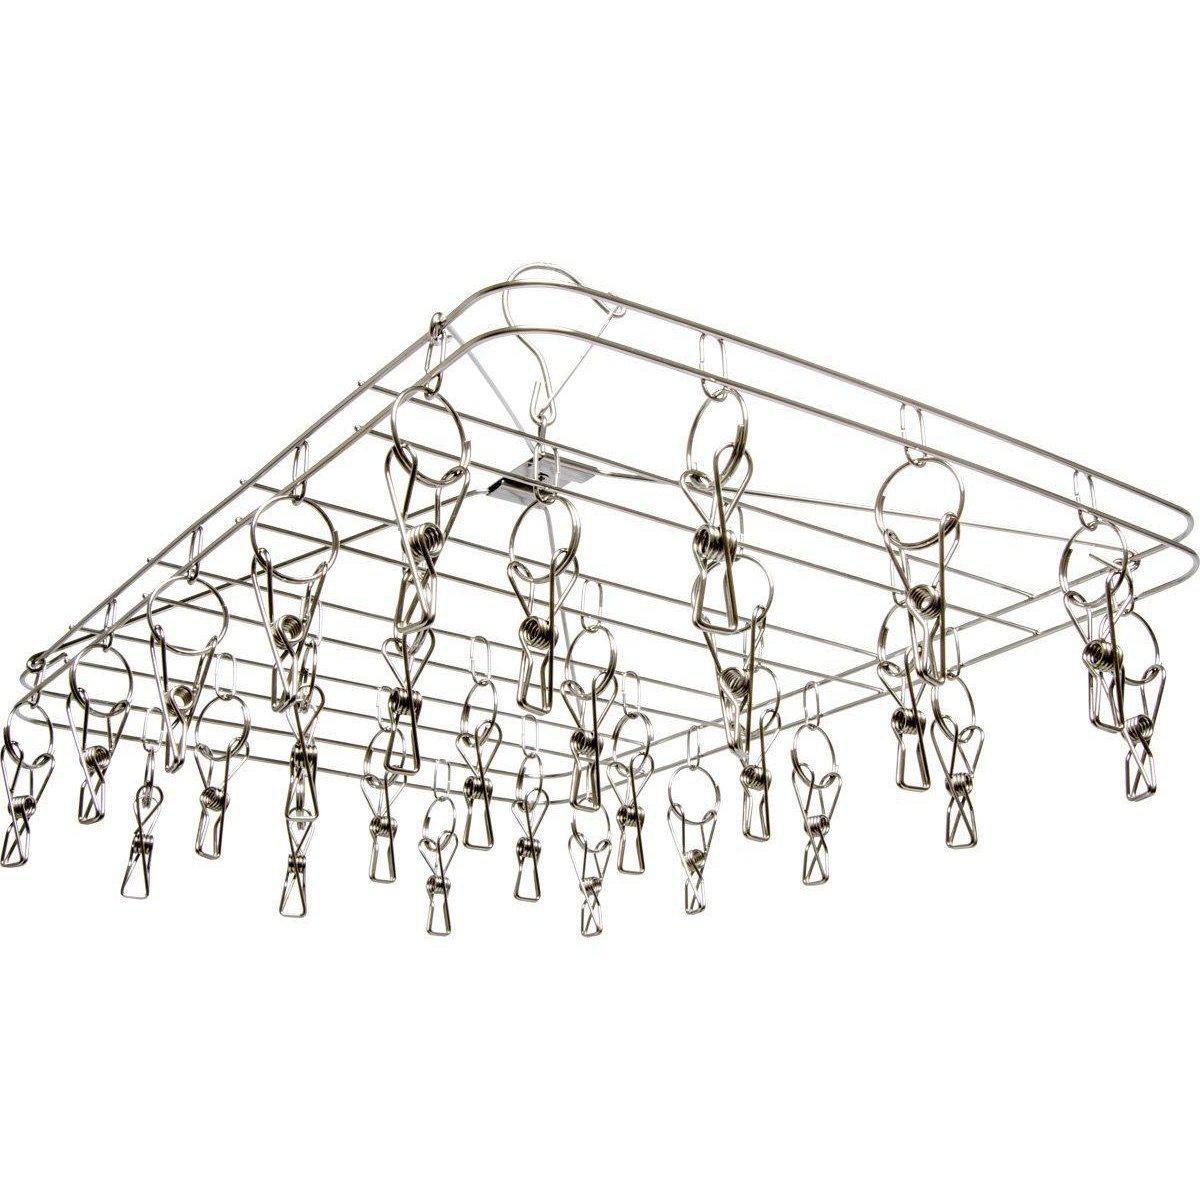 Accessories - STACK!T 28 Clip Stainless Steel Drying Rack - 638104020947- Gardin Warehouse